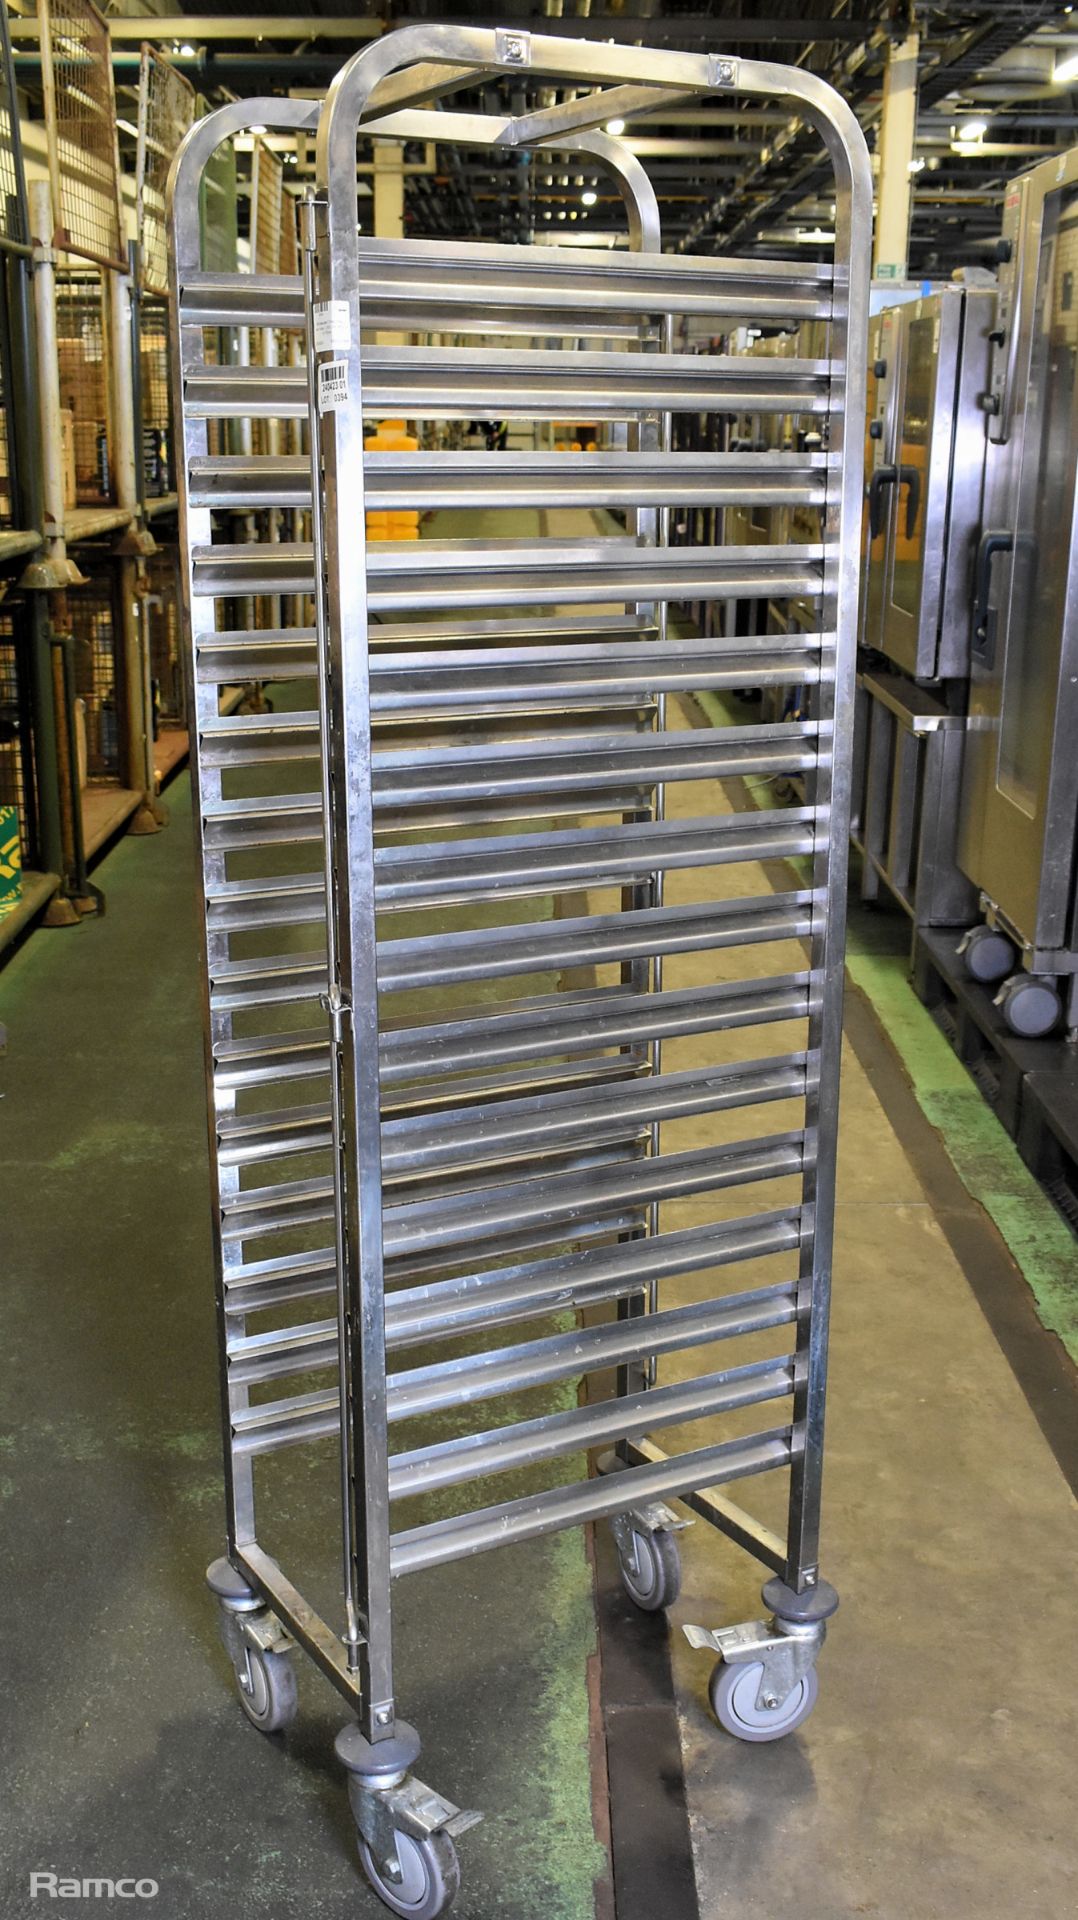 Stainless steel 15 tier tray/rack trolley - L 650 x W 450 x H 1750mm - Image 2 of 3